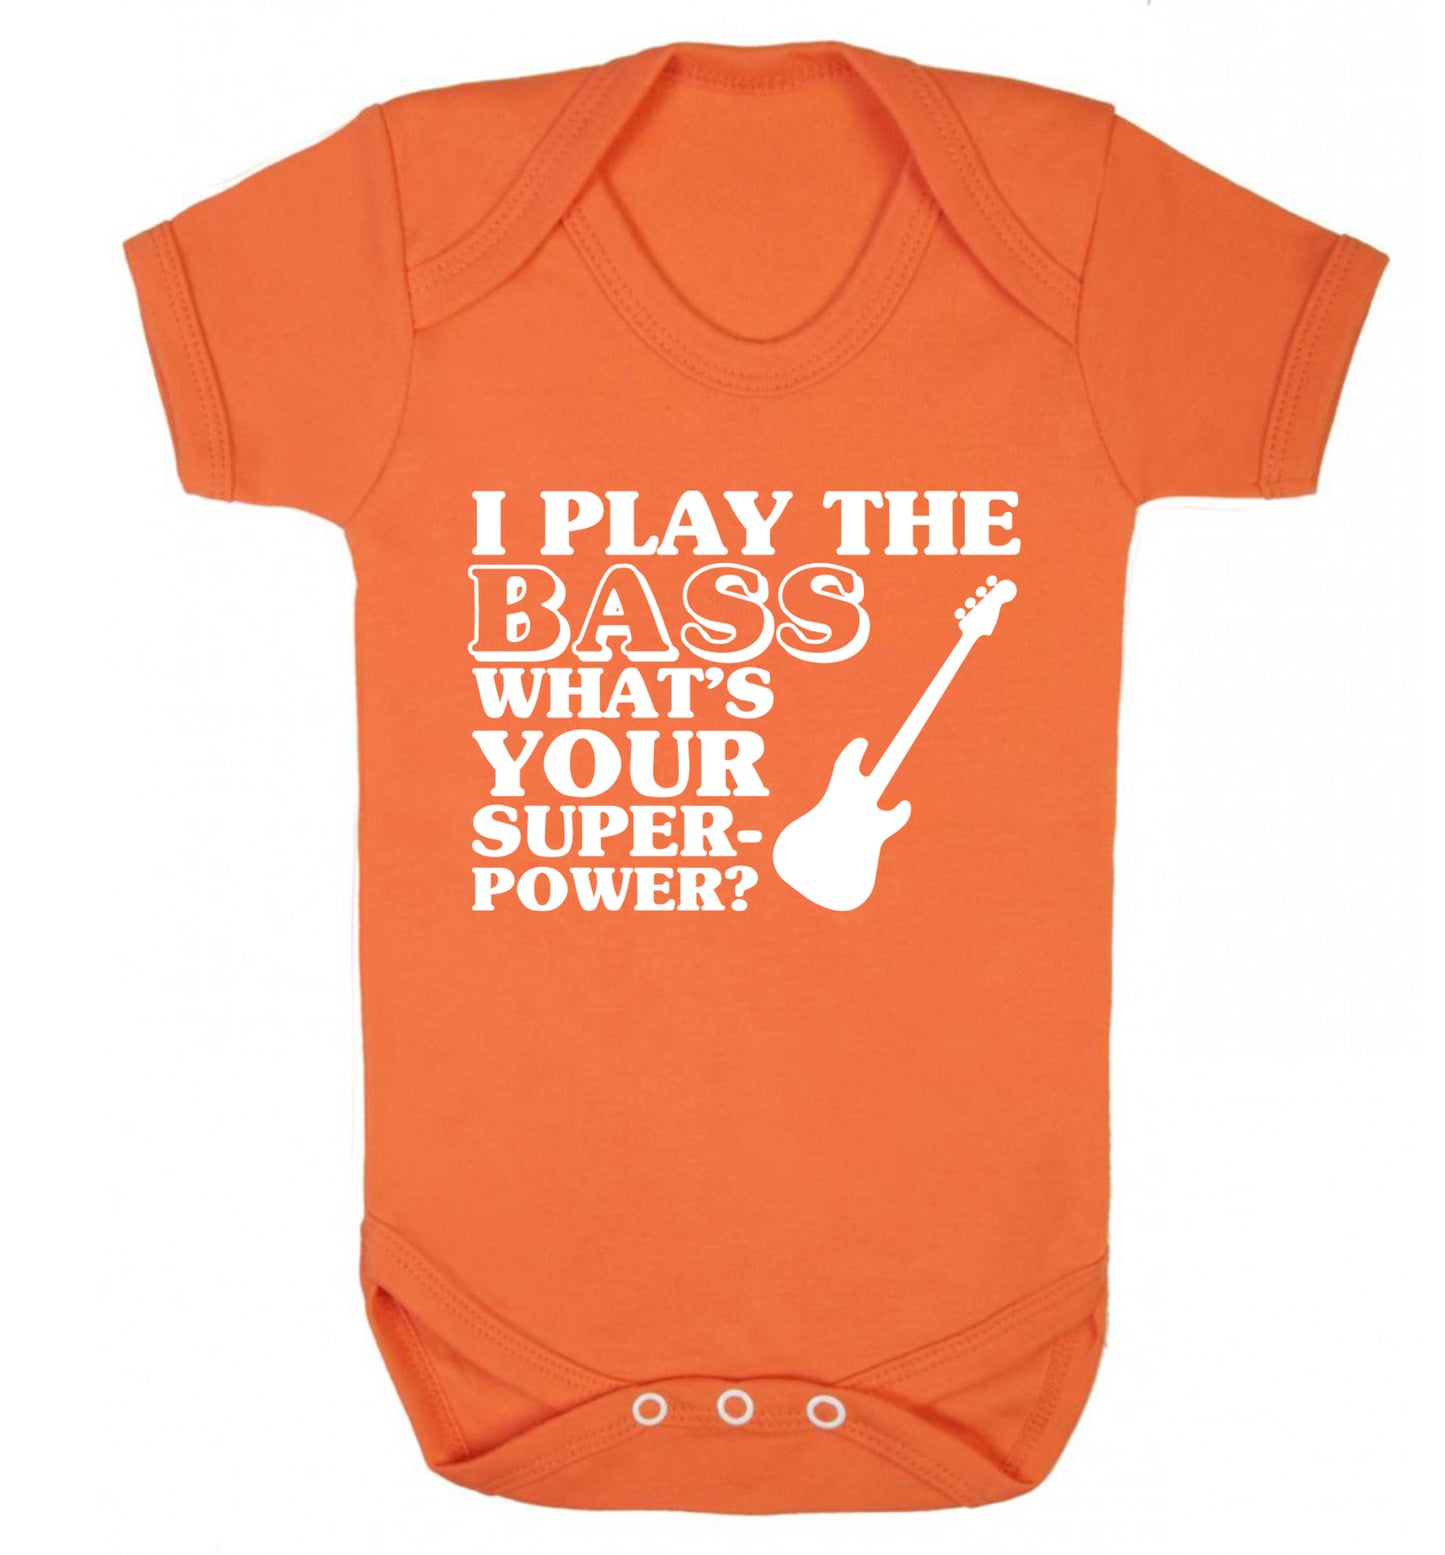 I play the bass what's your superpower? Baby Vest orange 18-24 months